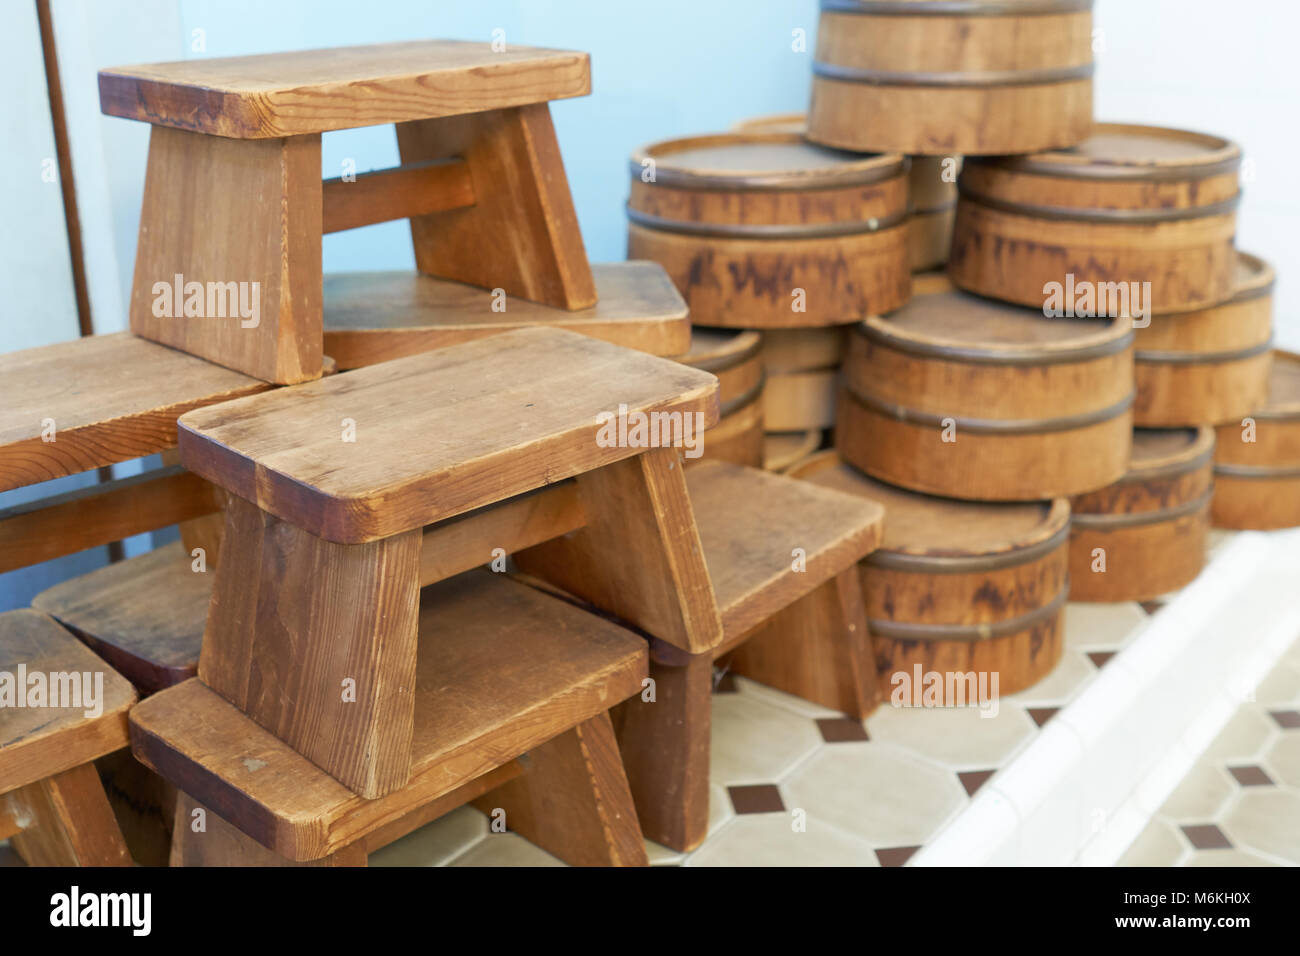 Seat for Onsen is made from wood of Japan. And a wooden shovel Bathing culture of Japan Total bathroom All the people shower together. It is of intere Stock Photo